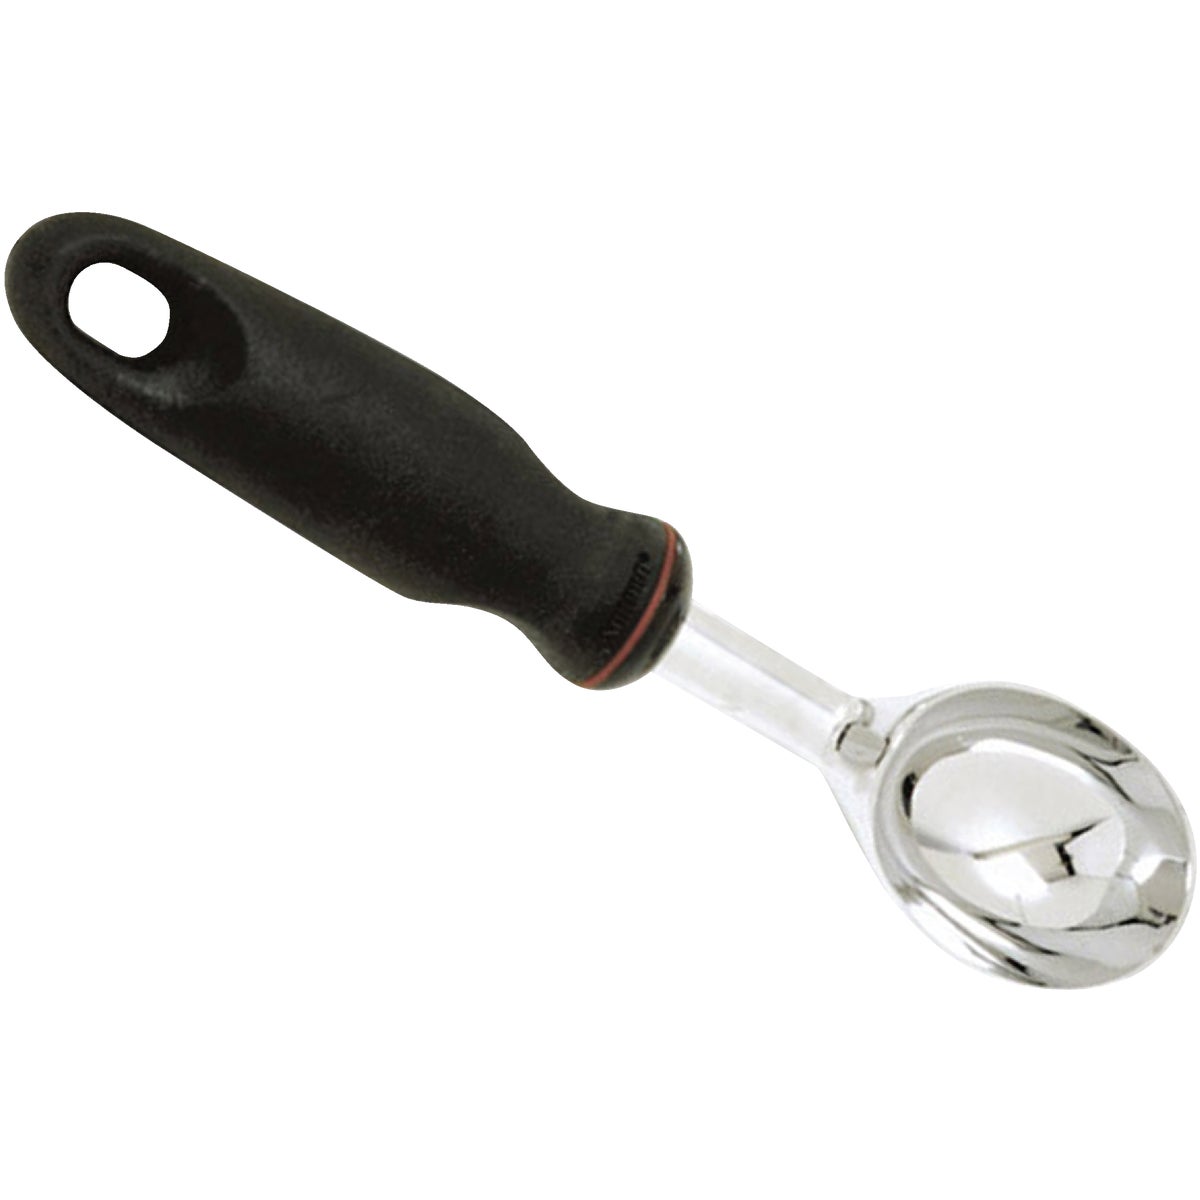 Item 630446, Full tang stainless steel handle provides extra strength for scooping 